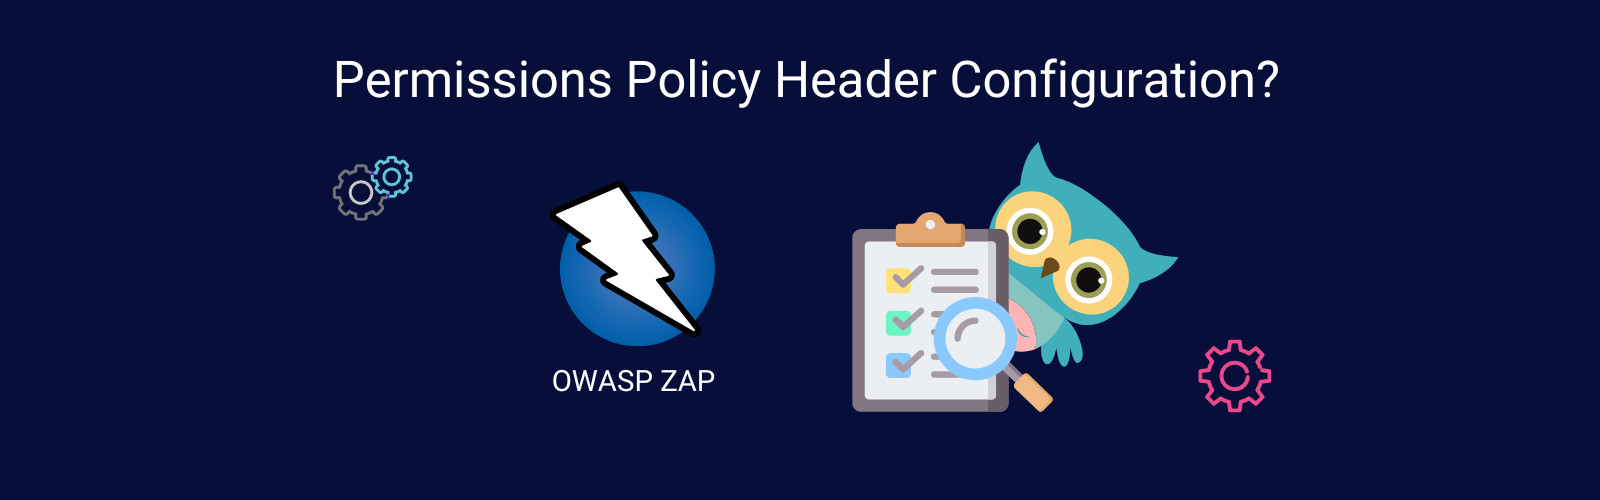 How to Test Permissions Policy Header Configuration with ZAP main image